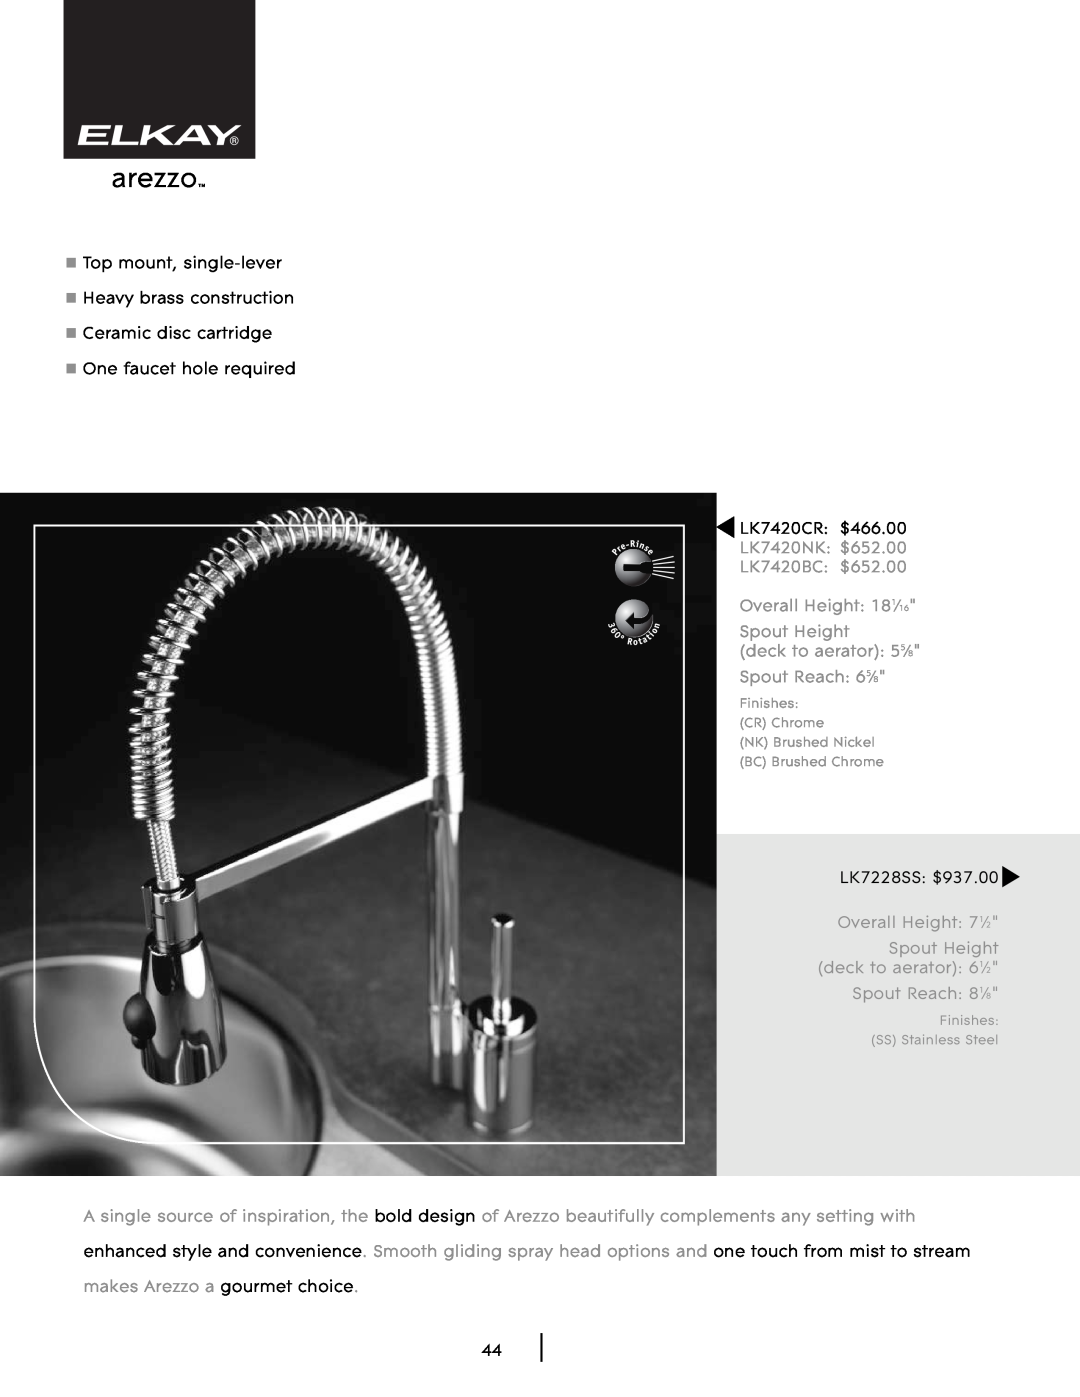 Elkay SHL-2 arezzo, Top mount, single-lever Heavy brass construction, Ceramic disc cartridge One faucet hole required 